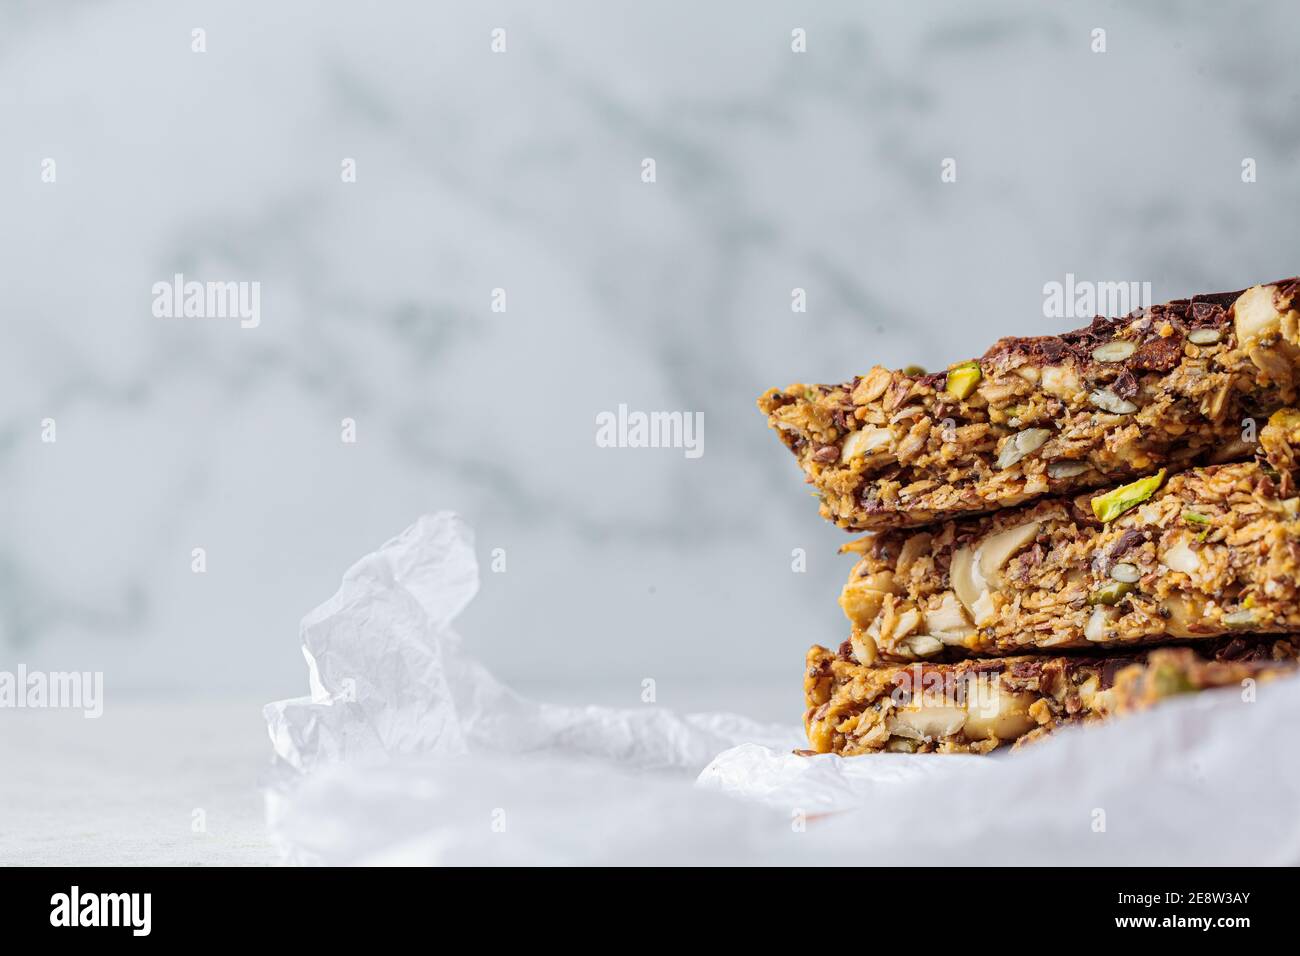 Homemade oat bars with berries and nuts, light background. Energy Protein Healthy Bars. Vegan dessert concept. Stock Photo